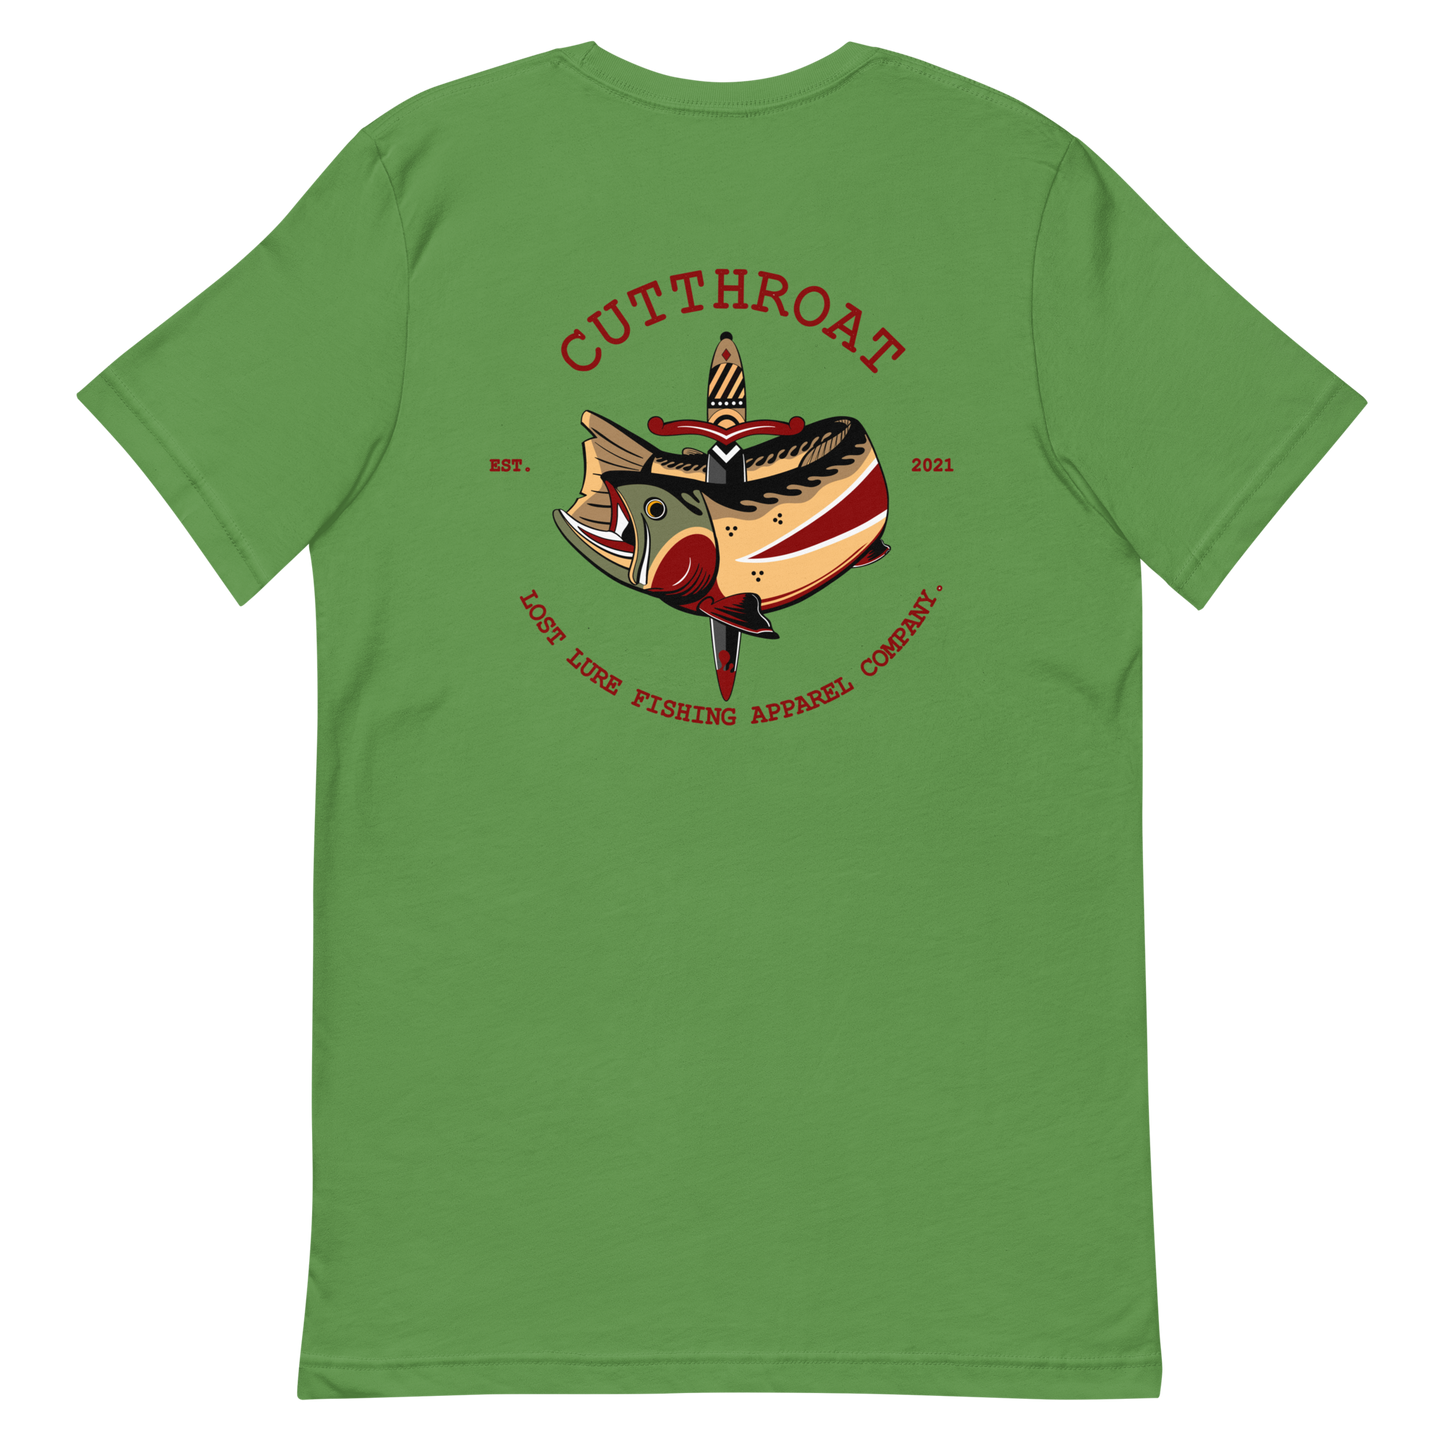 Cutthroat Trout fishing shirt. It’s an American traditional style design with a cutthroat trout and a dagger. The shirt reads Cutthroat trout, est. 2021, lost lure fishing apparel company. The front of the shirt has the lost lure logo. Green fishing shirt, back side